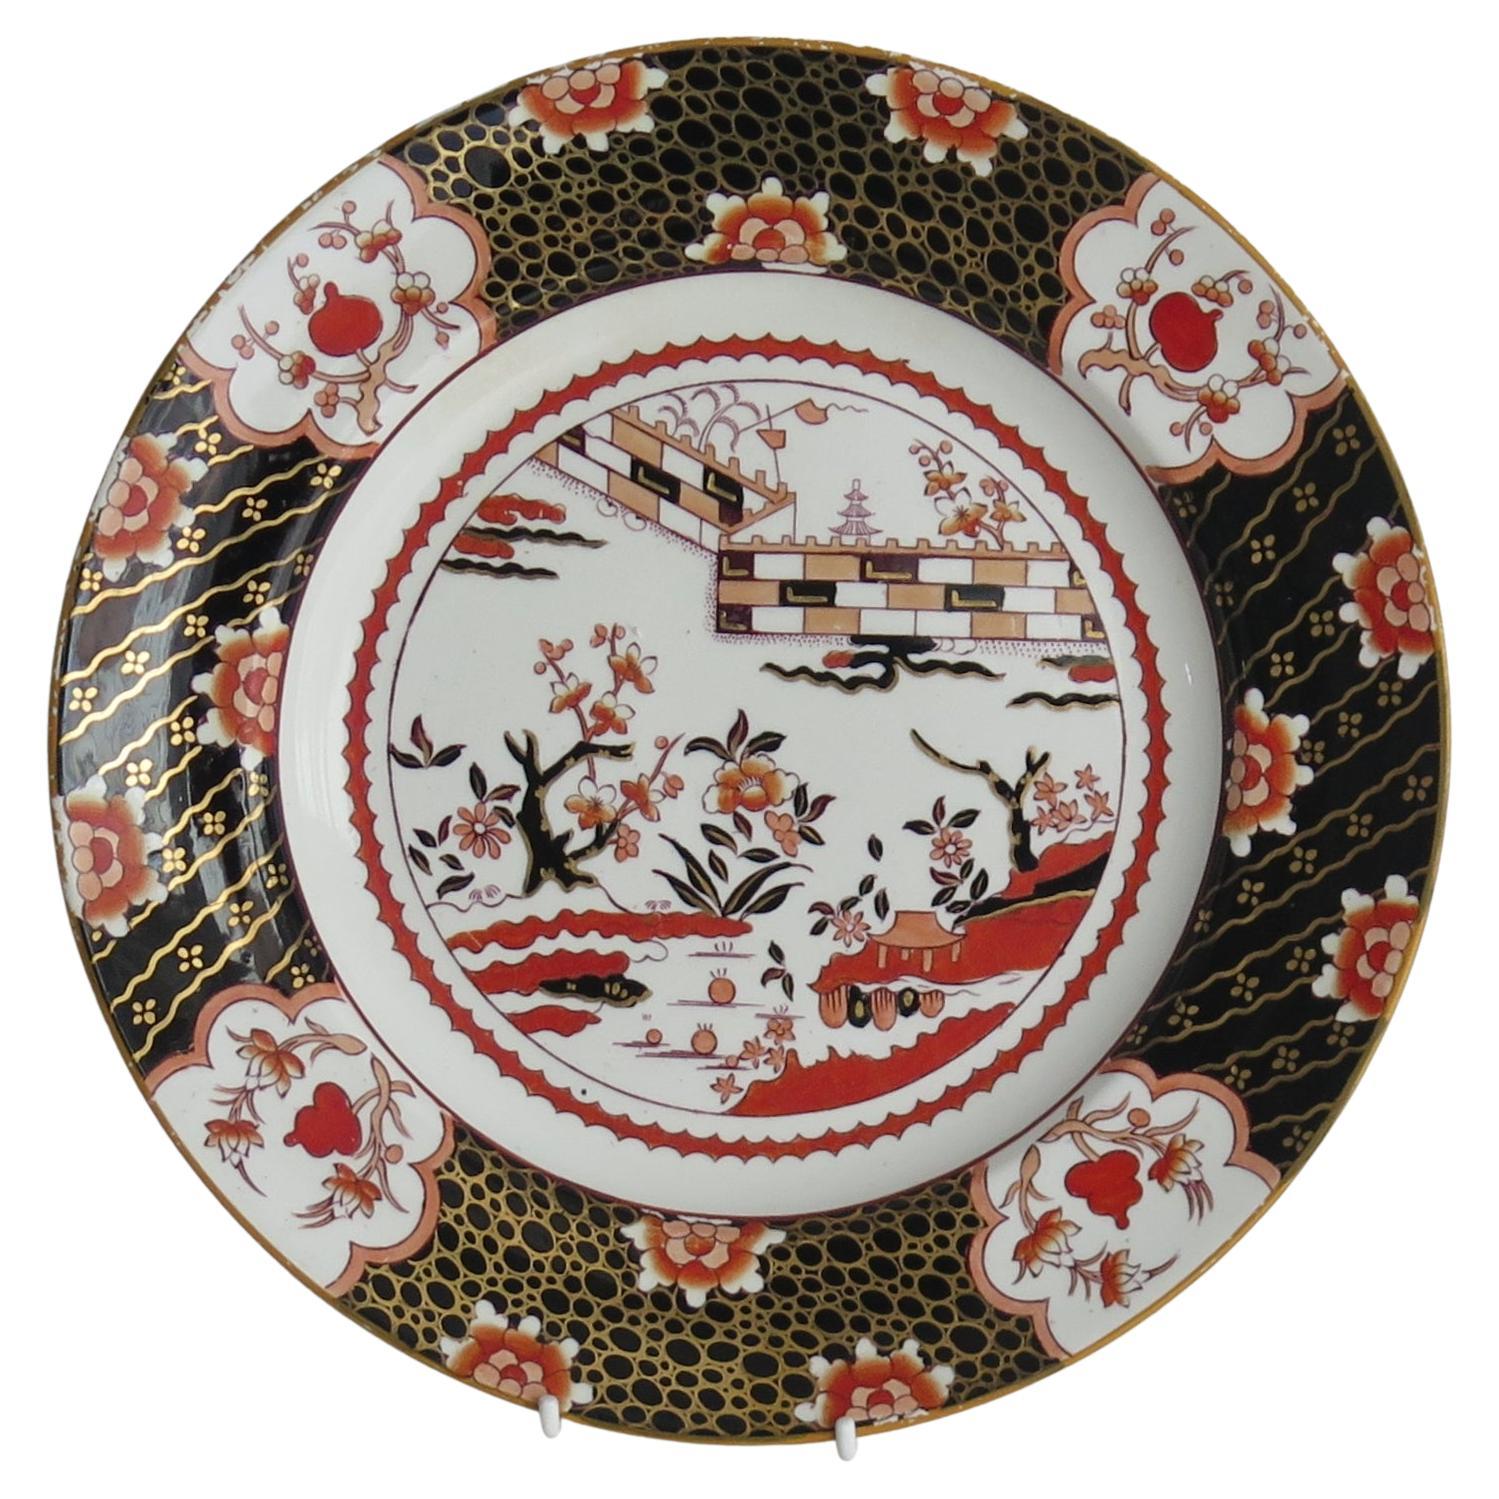 Mason's Ashworth's Ironstone Dinner Plate in Coloured Wall Pattern, circa 1870 For Sale